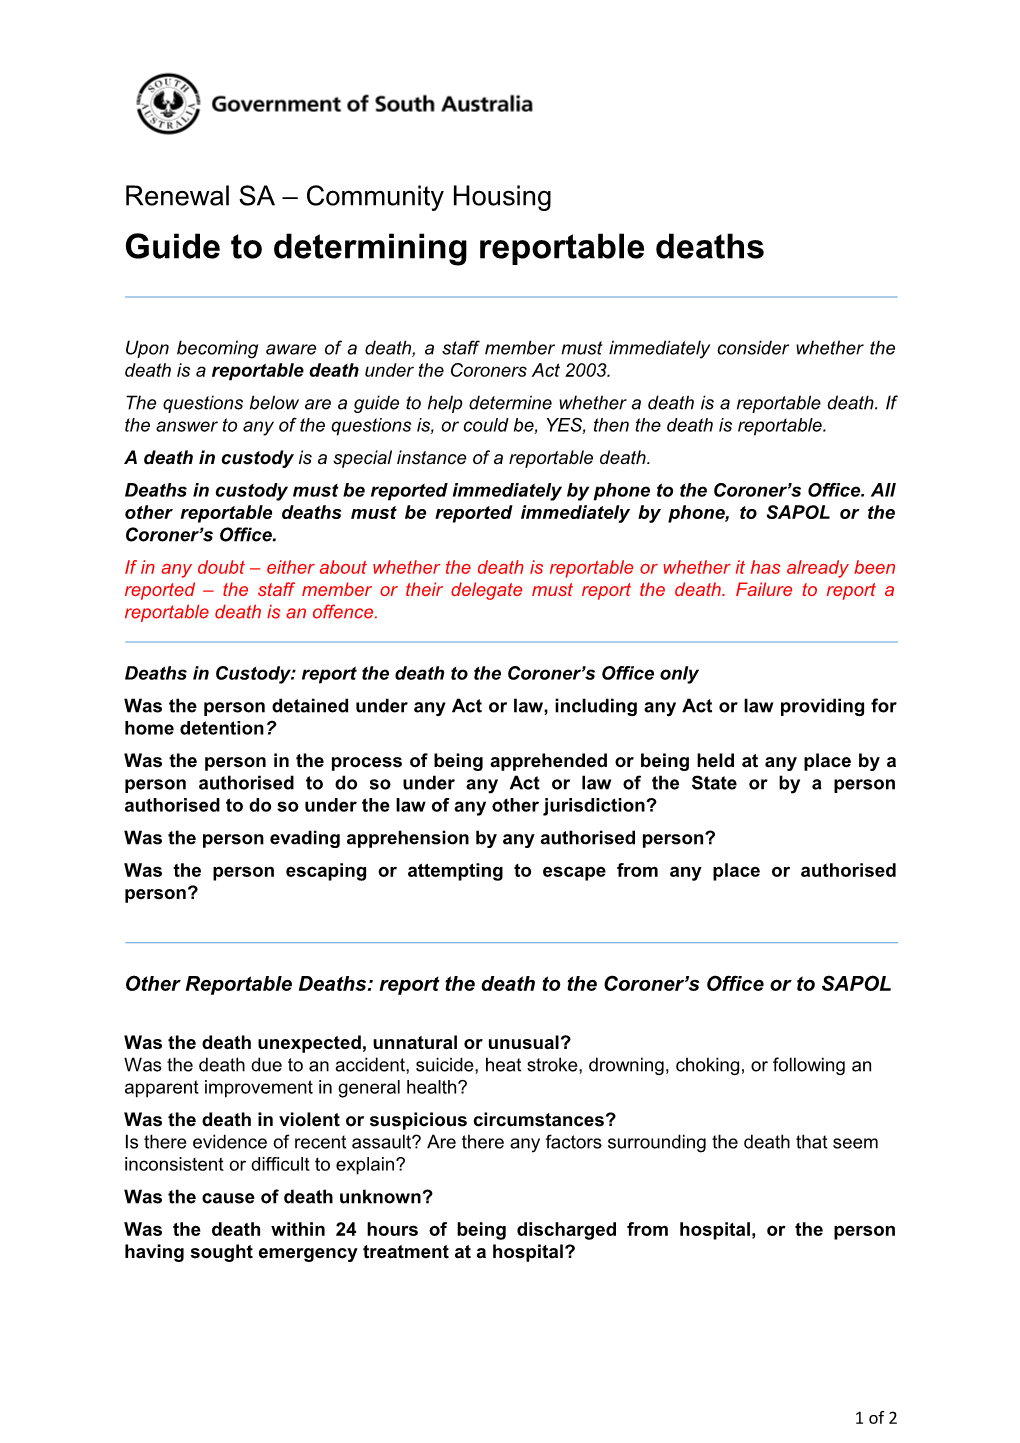 Guide to Determining Reportable Deaths